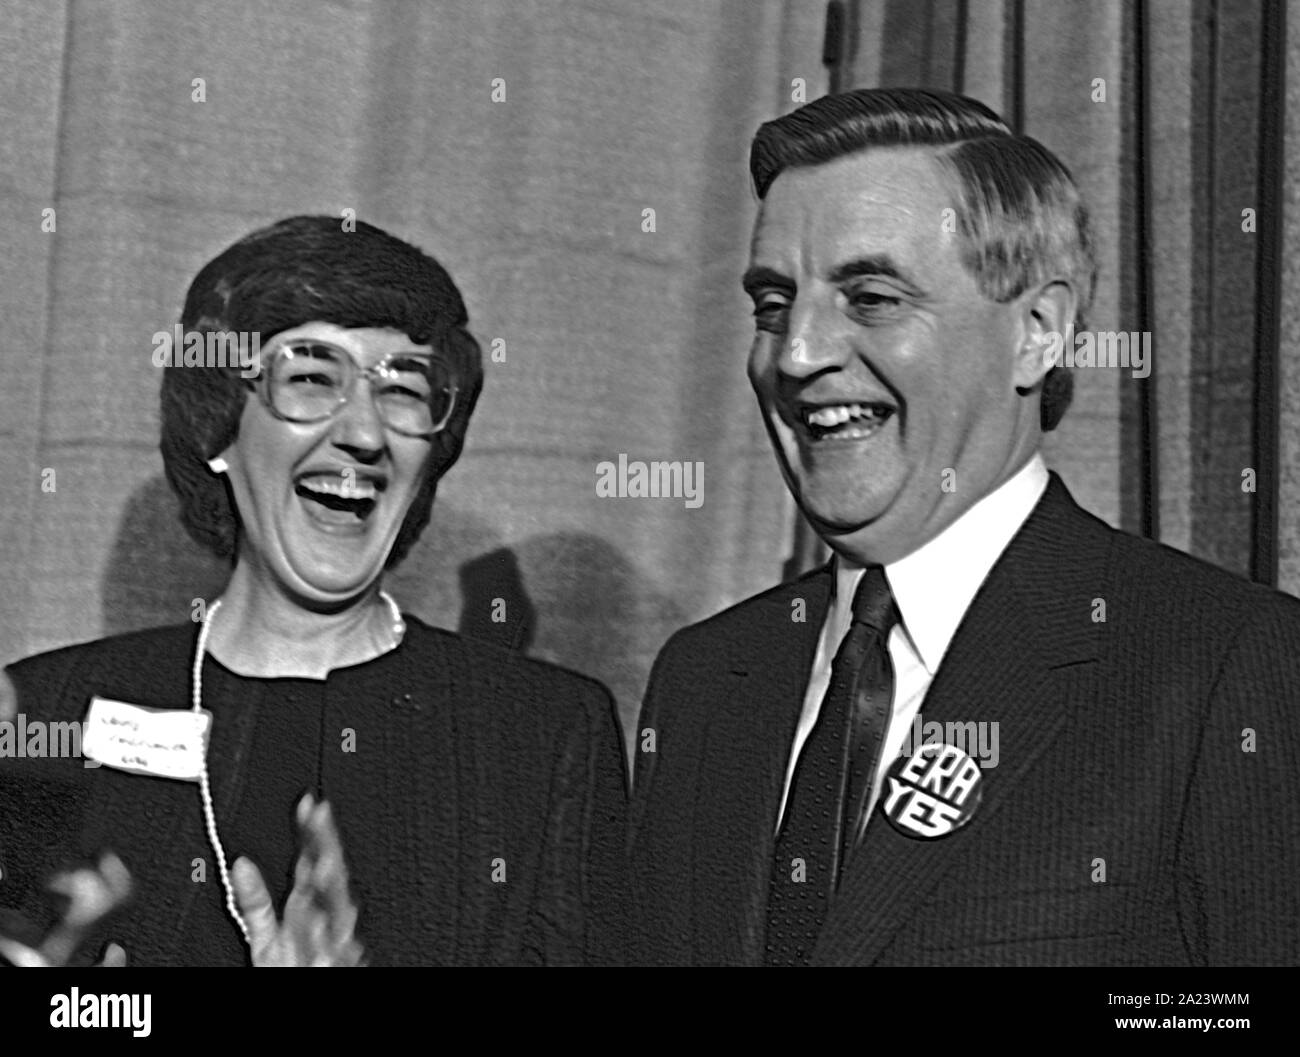 Washington DC, USA, February 15, 1984Washington DC, USA, February 15, 1984 Former United States Vice President Walter Mondale the Democratic Presidential candidate attends a fundraising rally at the headquarters of NOW. He is accompanied by NOW president Judy Goldsmith and congresswoman Barbara Mikulski Democrat from Maryland Stock Photo